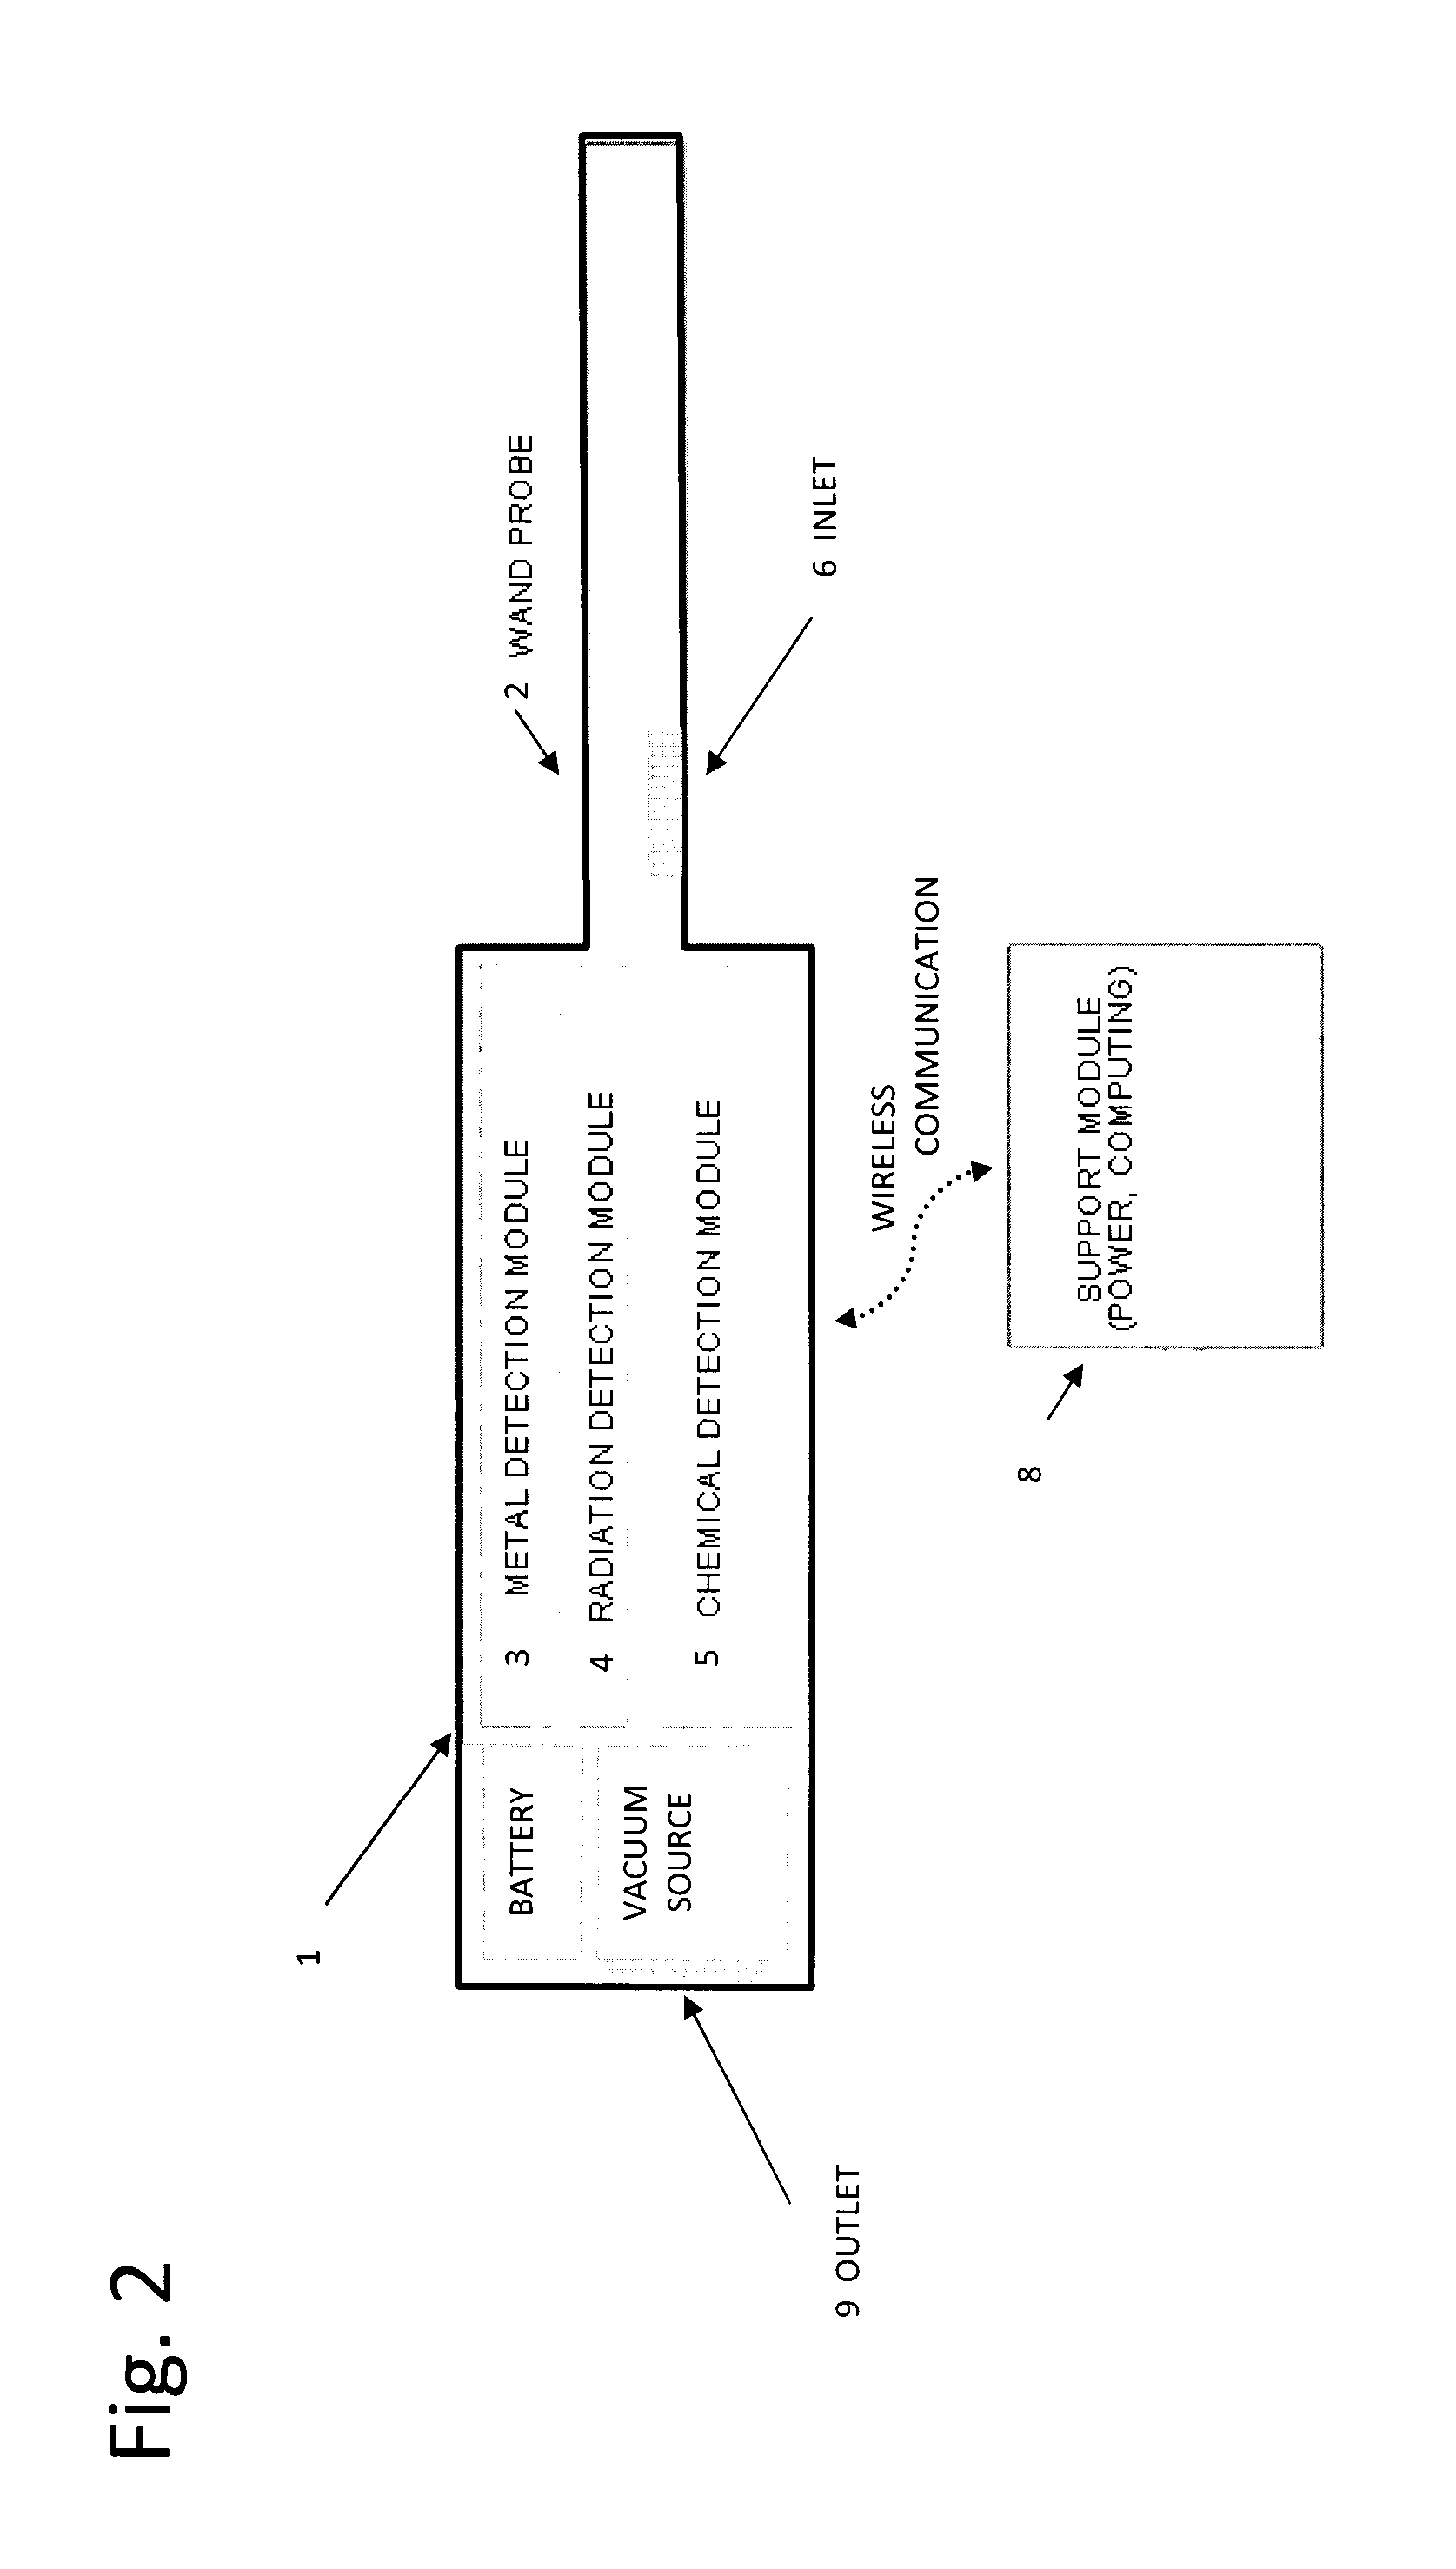 Non-invasive method and apparatus for detecting the presence of illicit substances